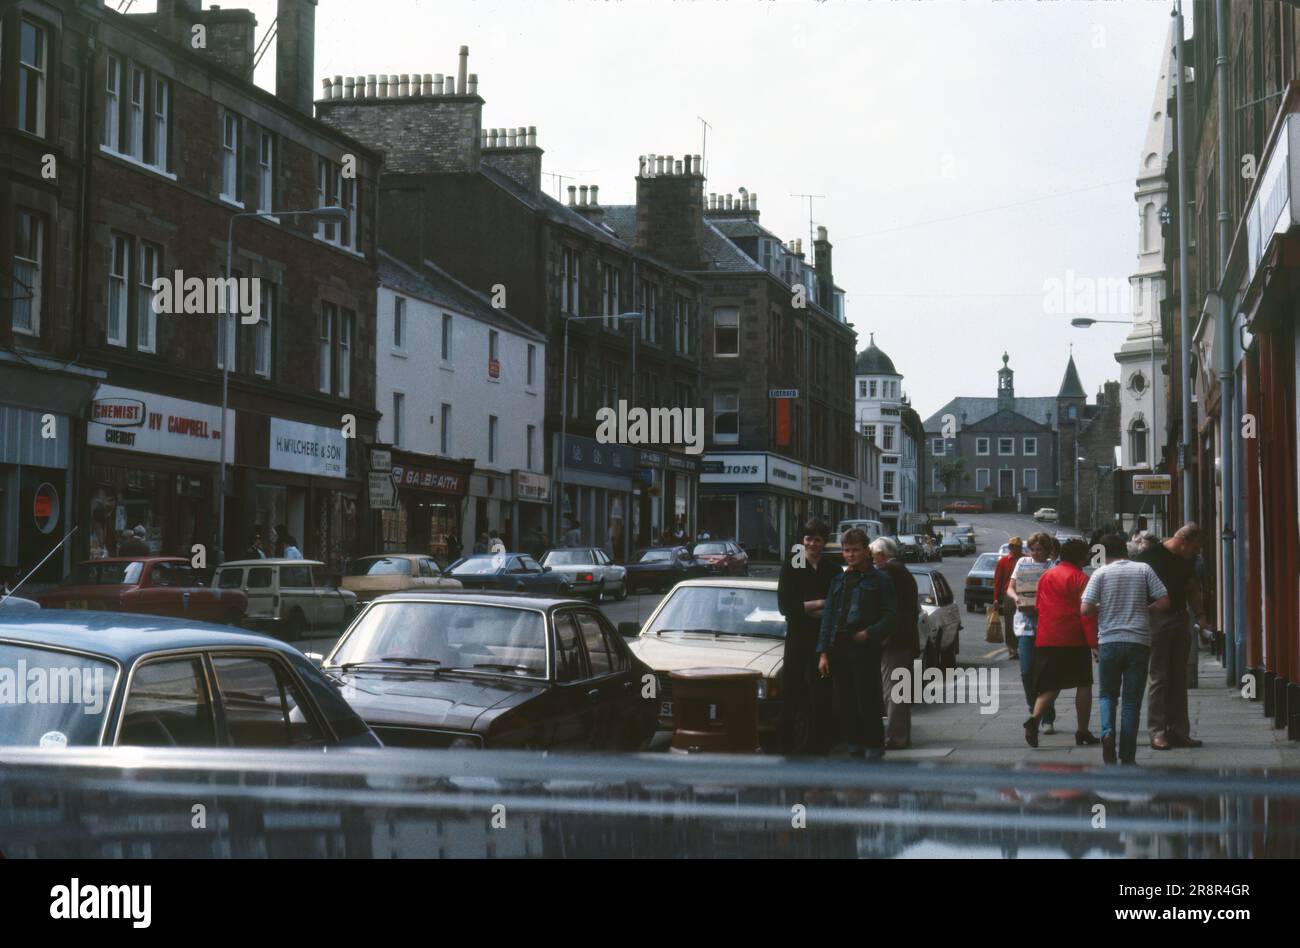 Campbeltown, Scotland, United Kingdom- July 1983: View down Main Street in Campbeltown, vintage cars and shops Stock Photo